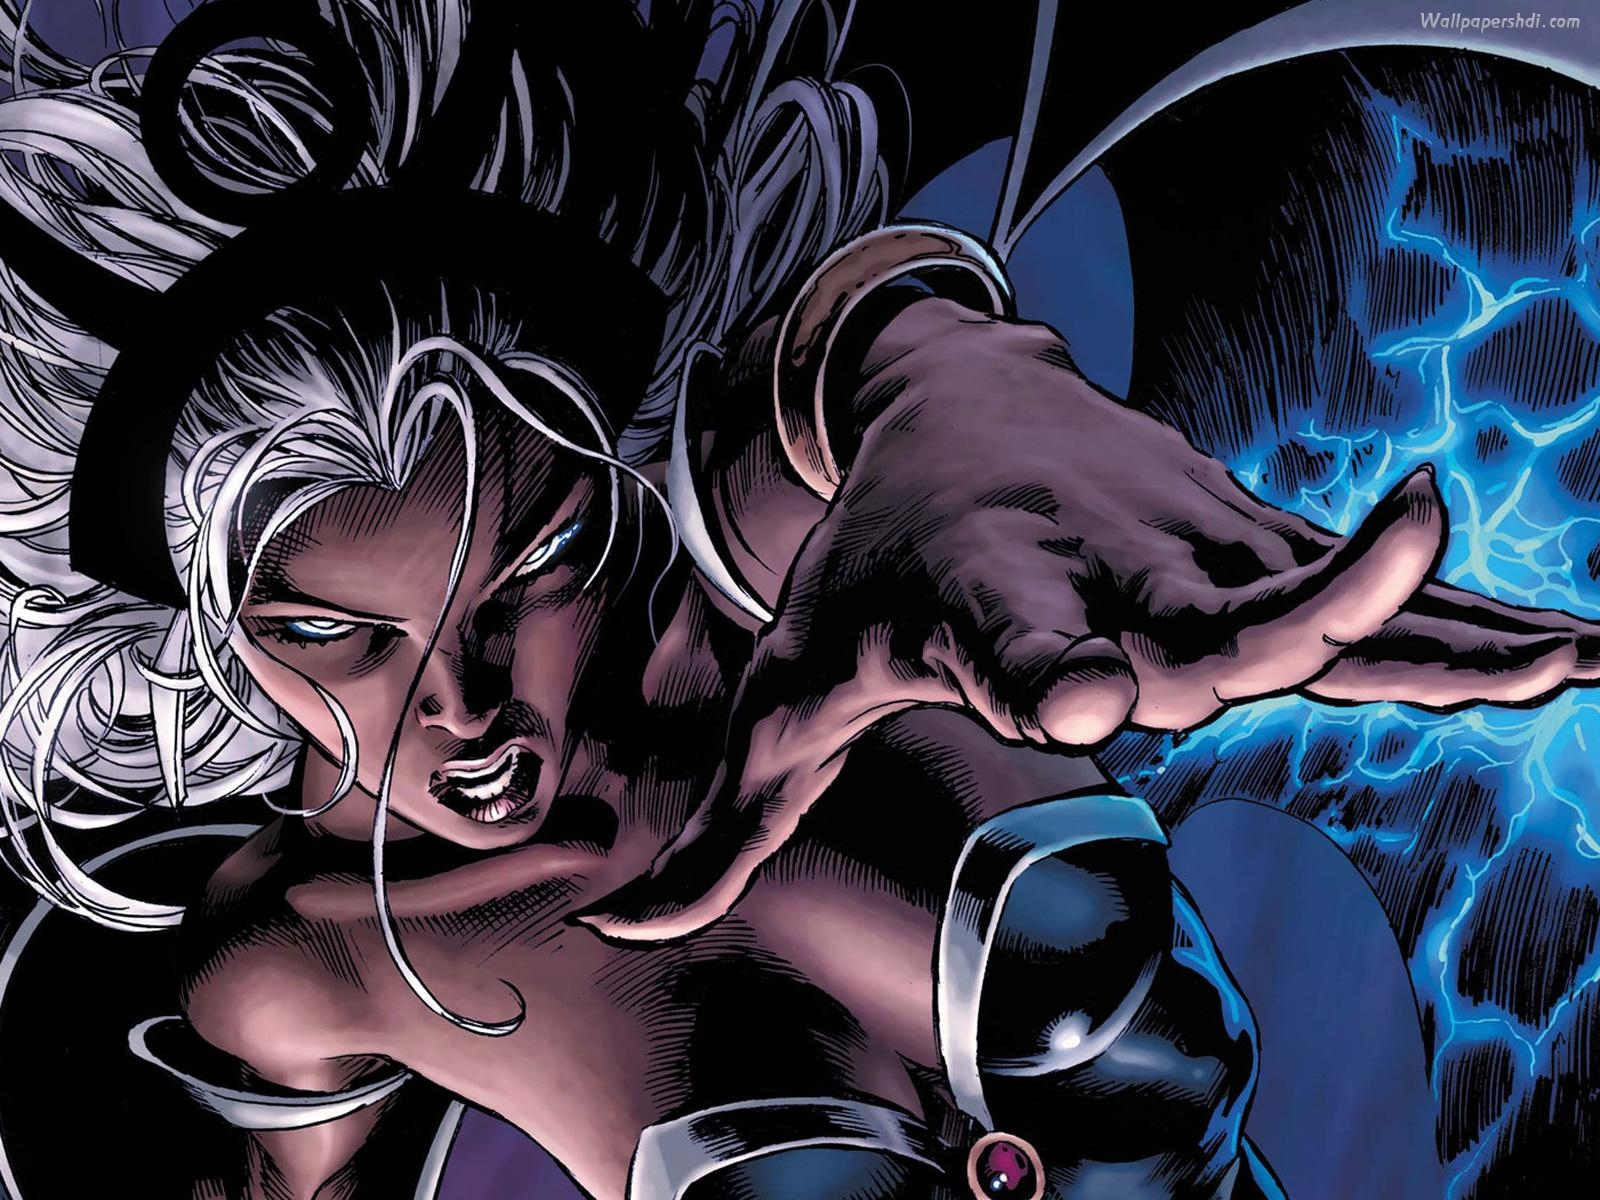 Free download Storm Ororo Munroe wallpaper x men 31690327 1600 1200png [1600x1200] for your Desktop, Mobile & Tablet. Explore X Men Storm Wallpaper. Storm Picture Wallpaper, X Men Picture